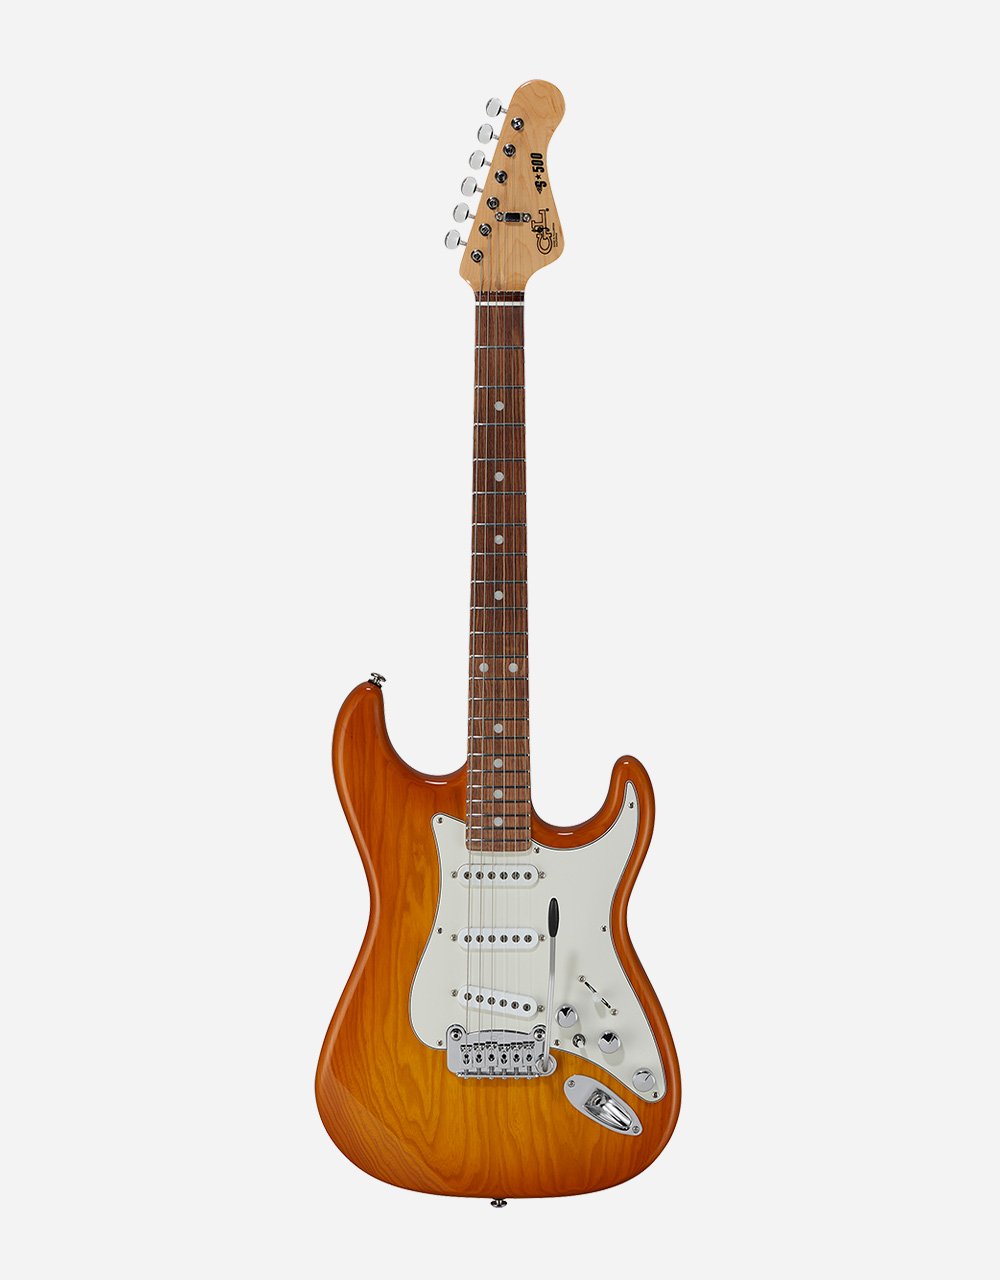 CLF Research S•500 | G&L Musical Instruments